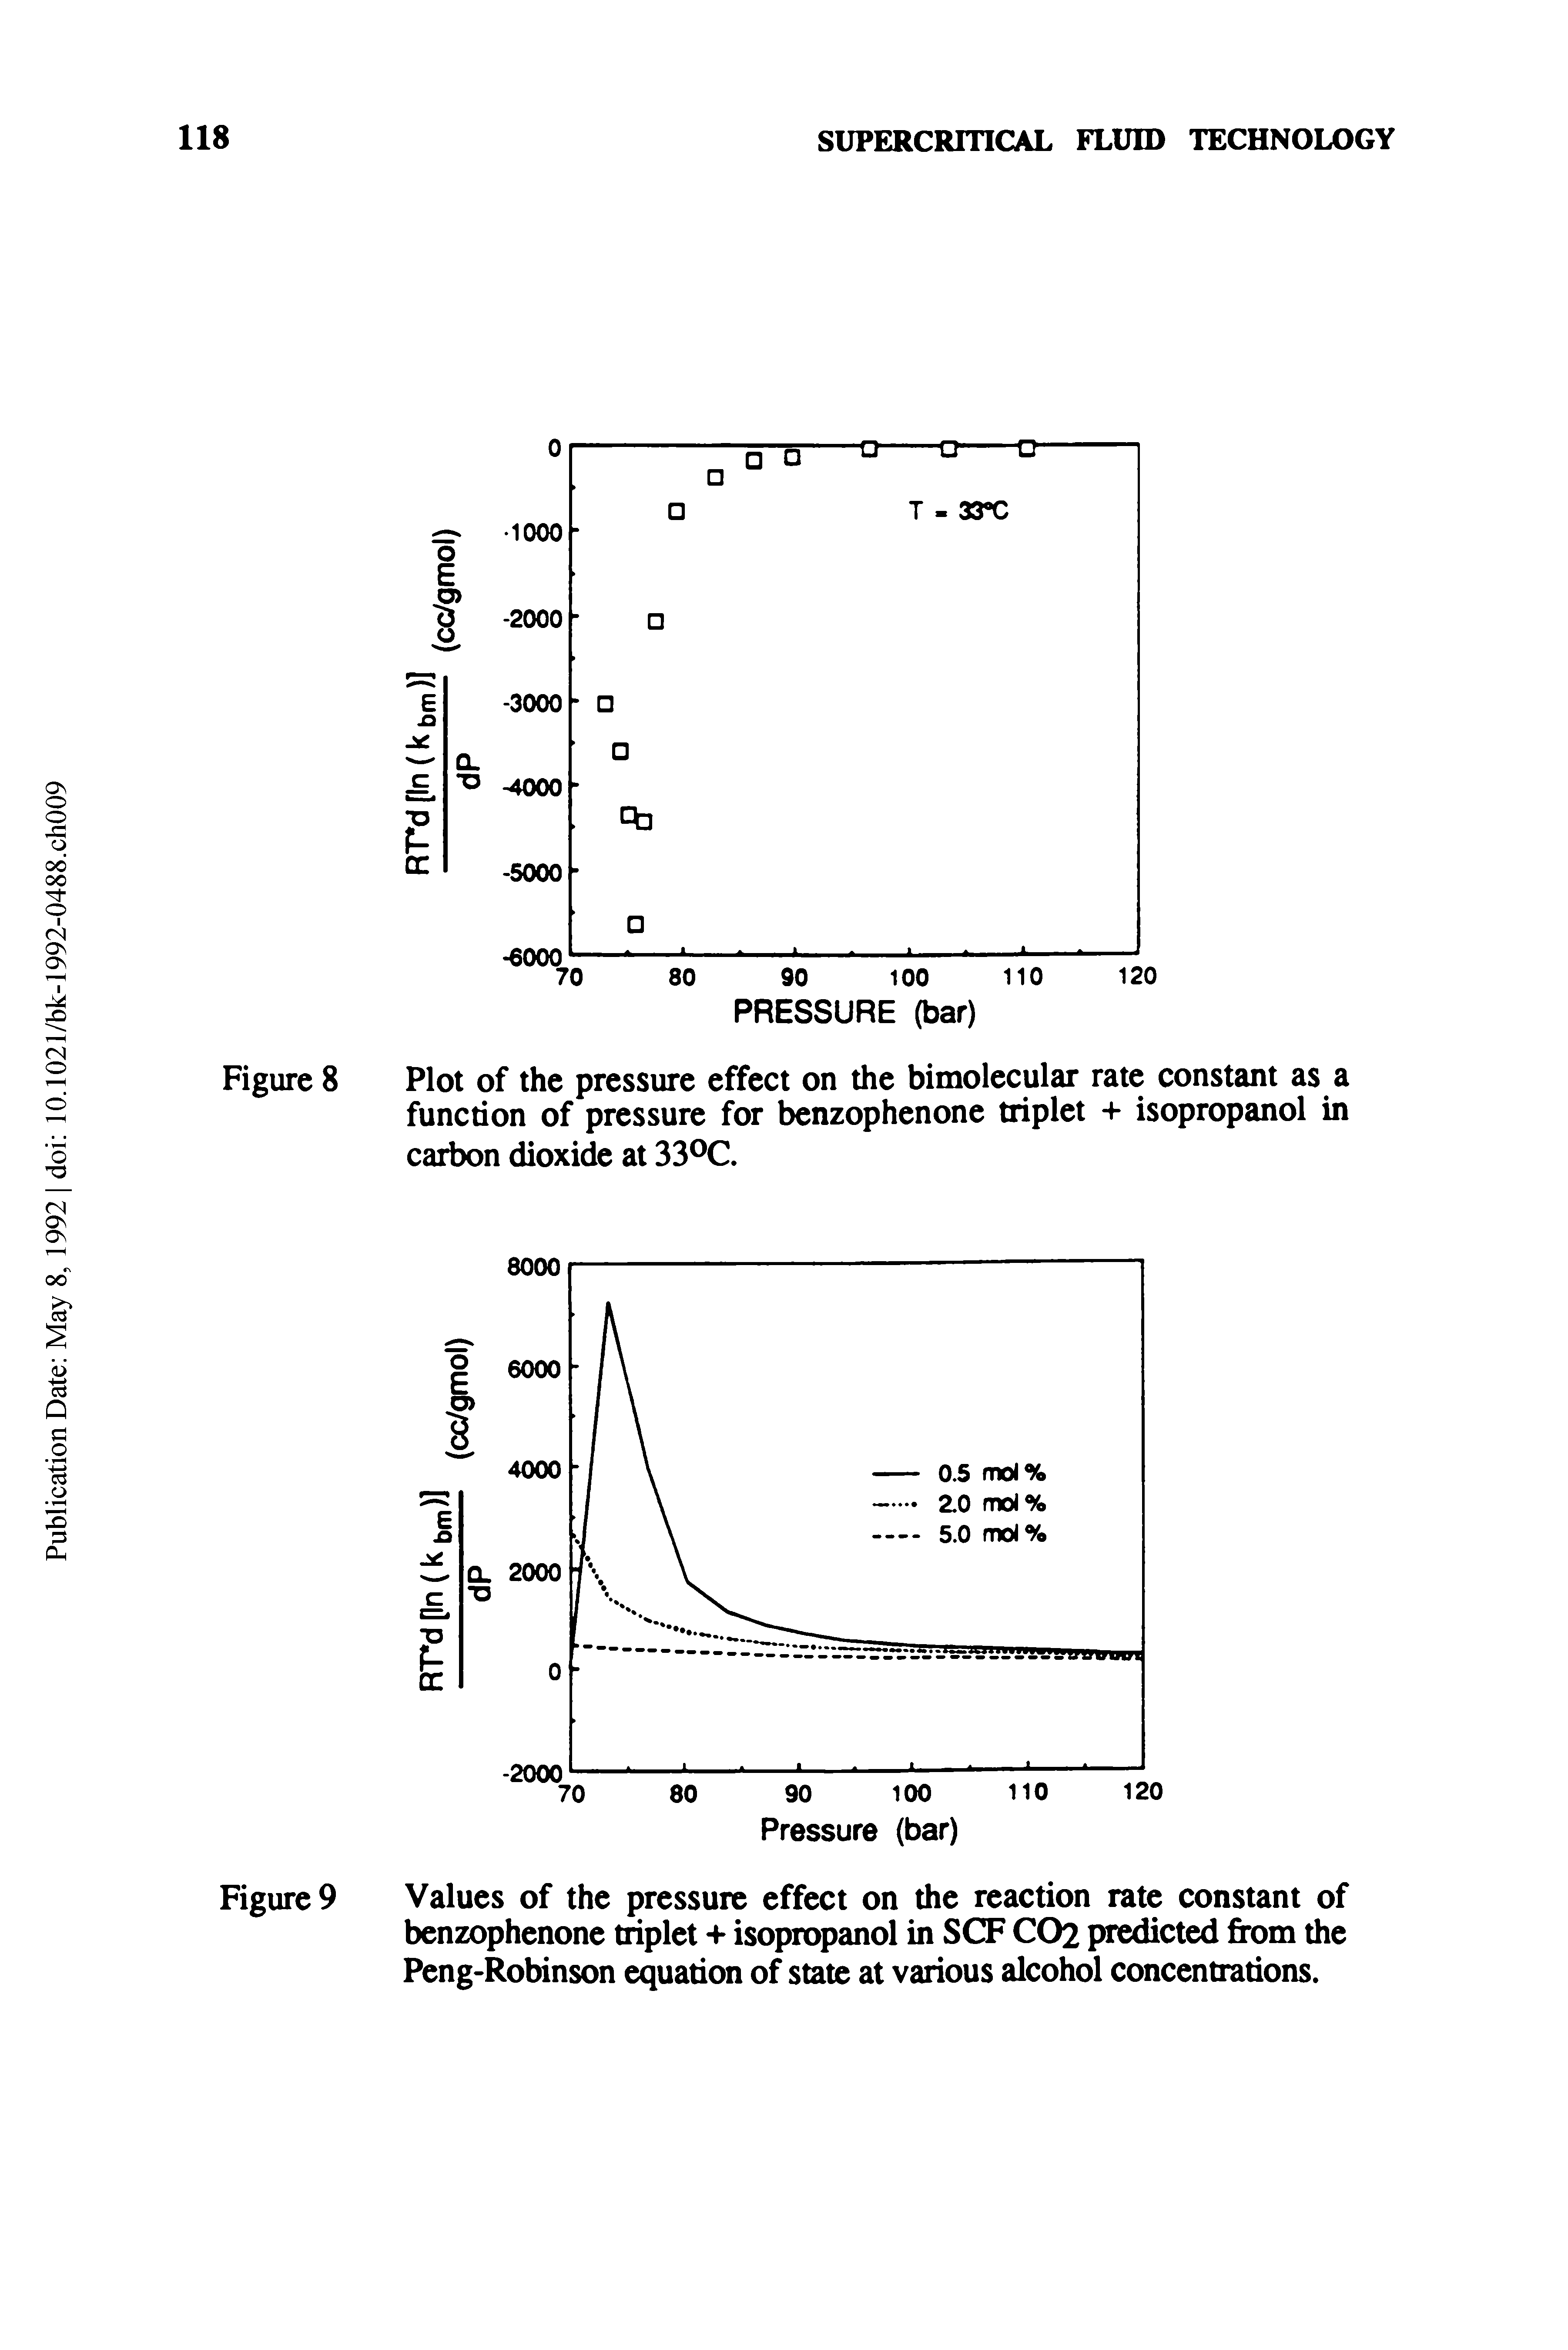 Figure 9 Values of the pressure effect on the reaction rate constant of benzophenone triplet + isopropanol in SCF CO2 predicted from the Peng-Robinson equation of state at various alcohol concentrations.